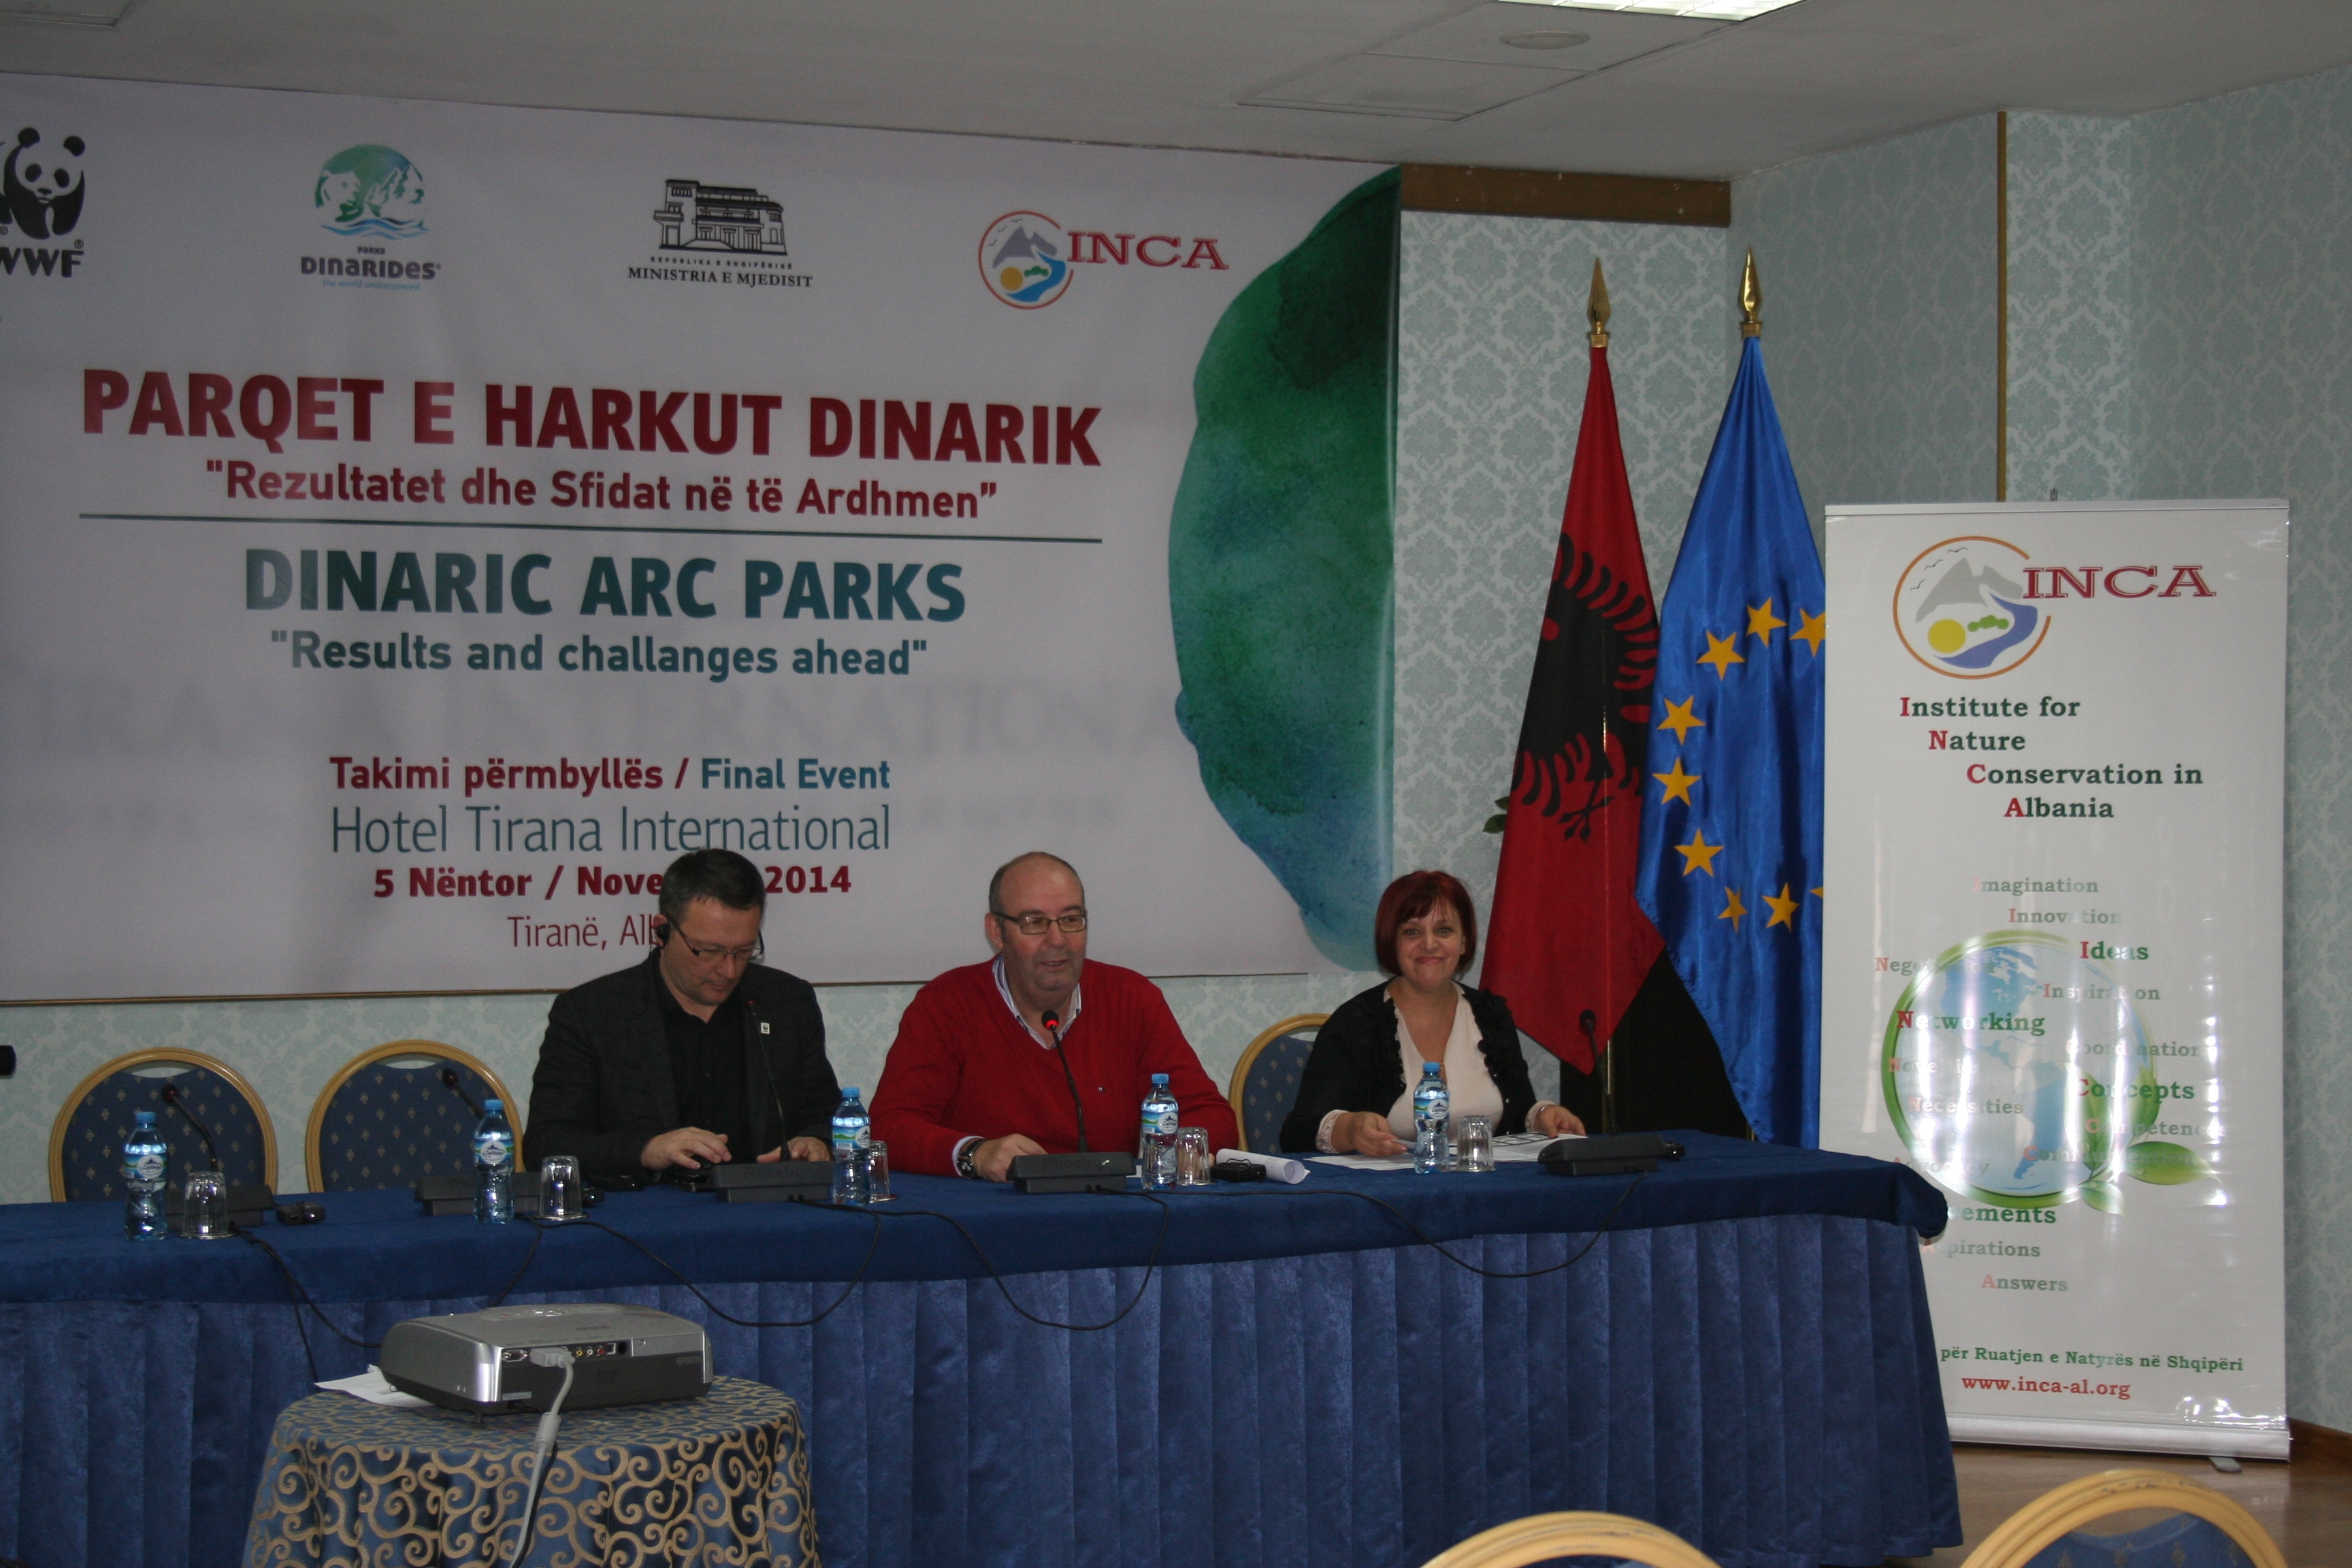 Dinaric Arc Parks in Albania - Results and challanges ahead